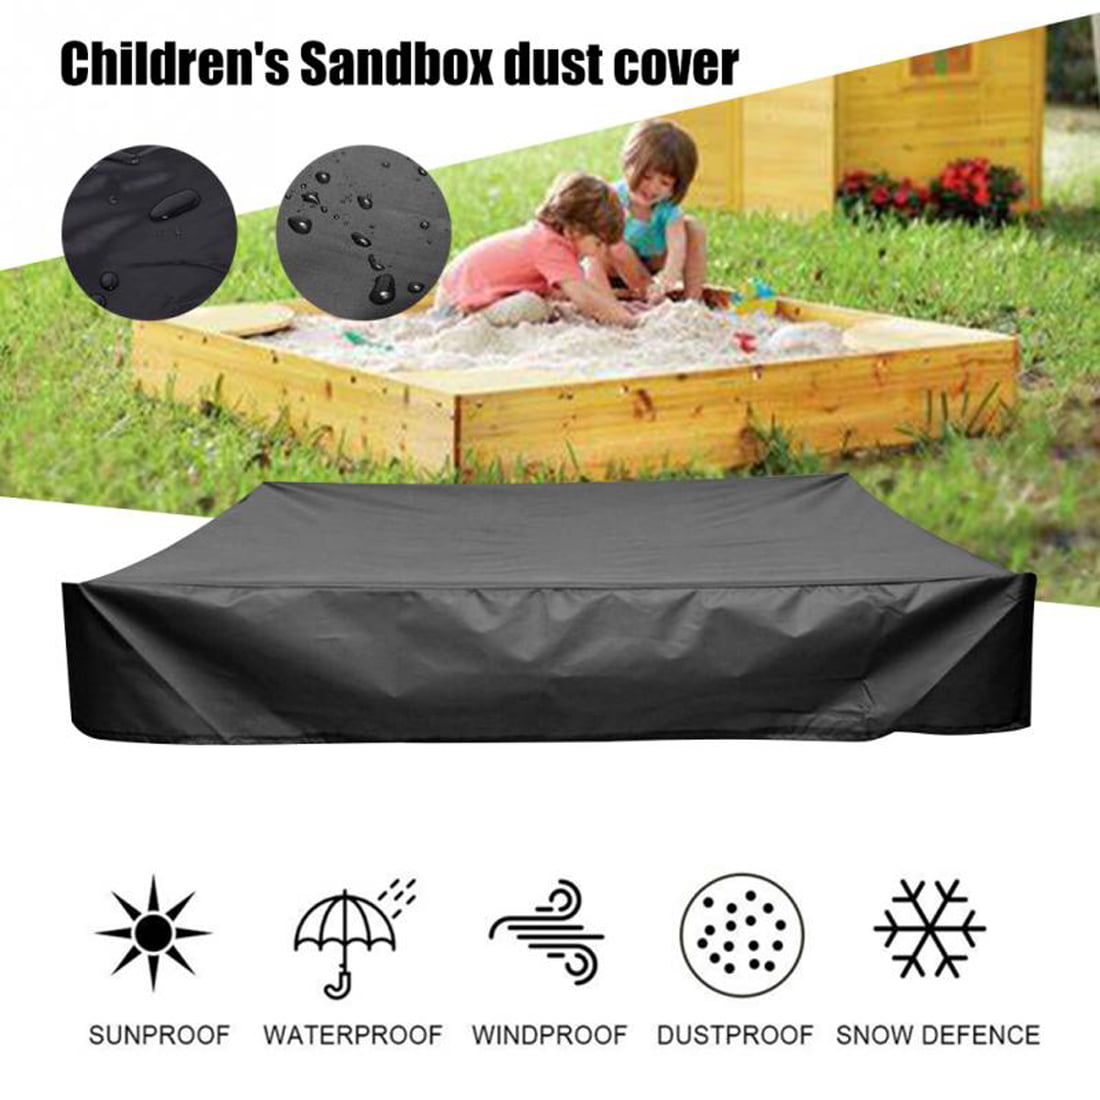 Rectangular Sandbox Cover Pools Waterproof Sandpit Pool Cover with Drawstring Sandbox Protective Canopy Cover for Sand Pits Premium 600D Oxford Cloth Sandpit Dust Cover Kids Toys Garden 